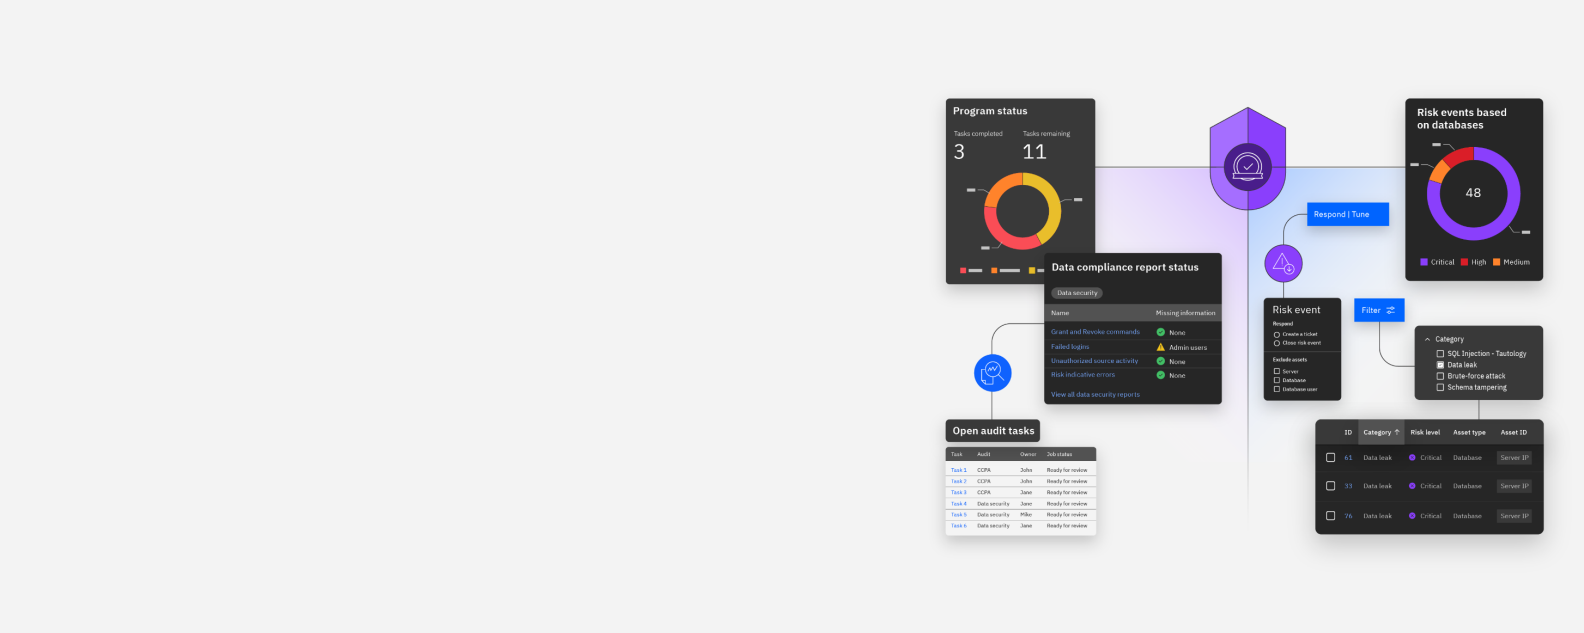 Illustration of Guardium Insights product UI and security elements